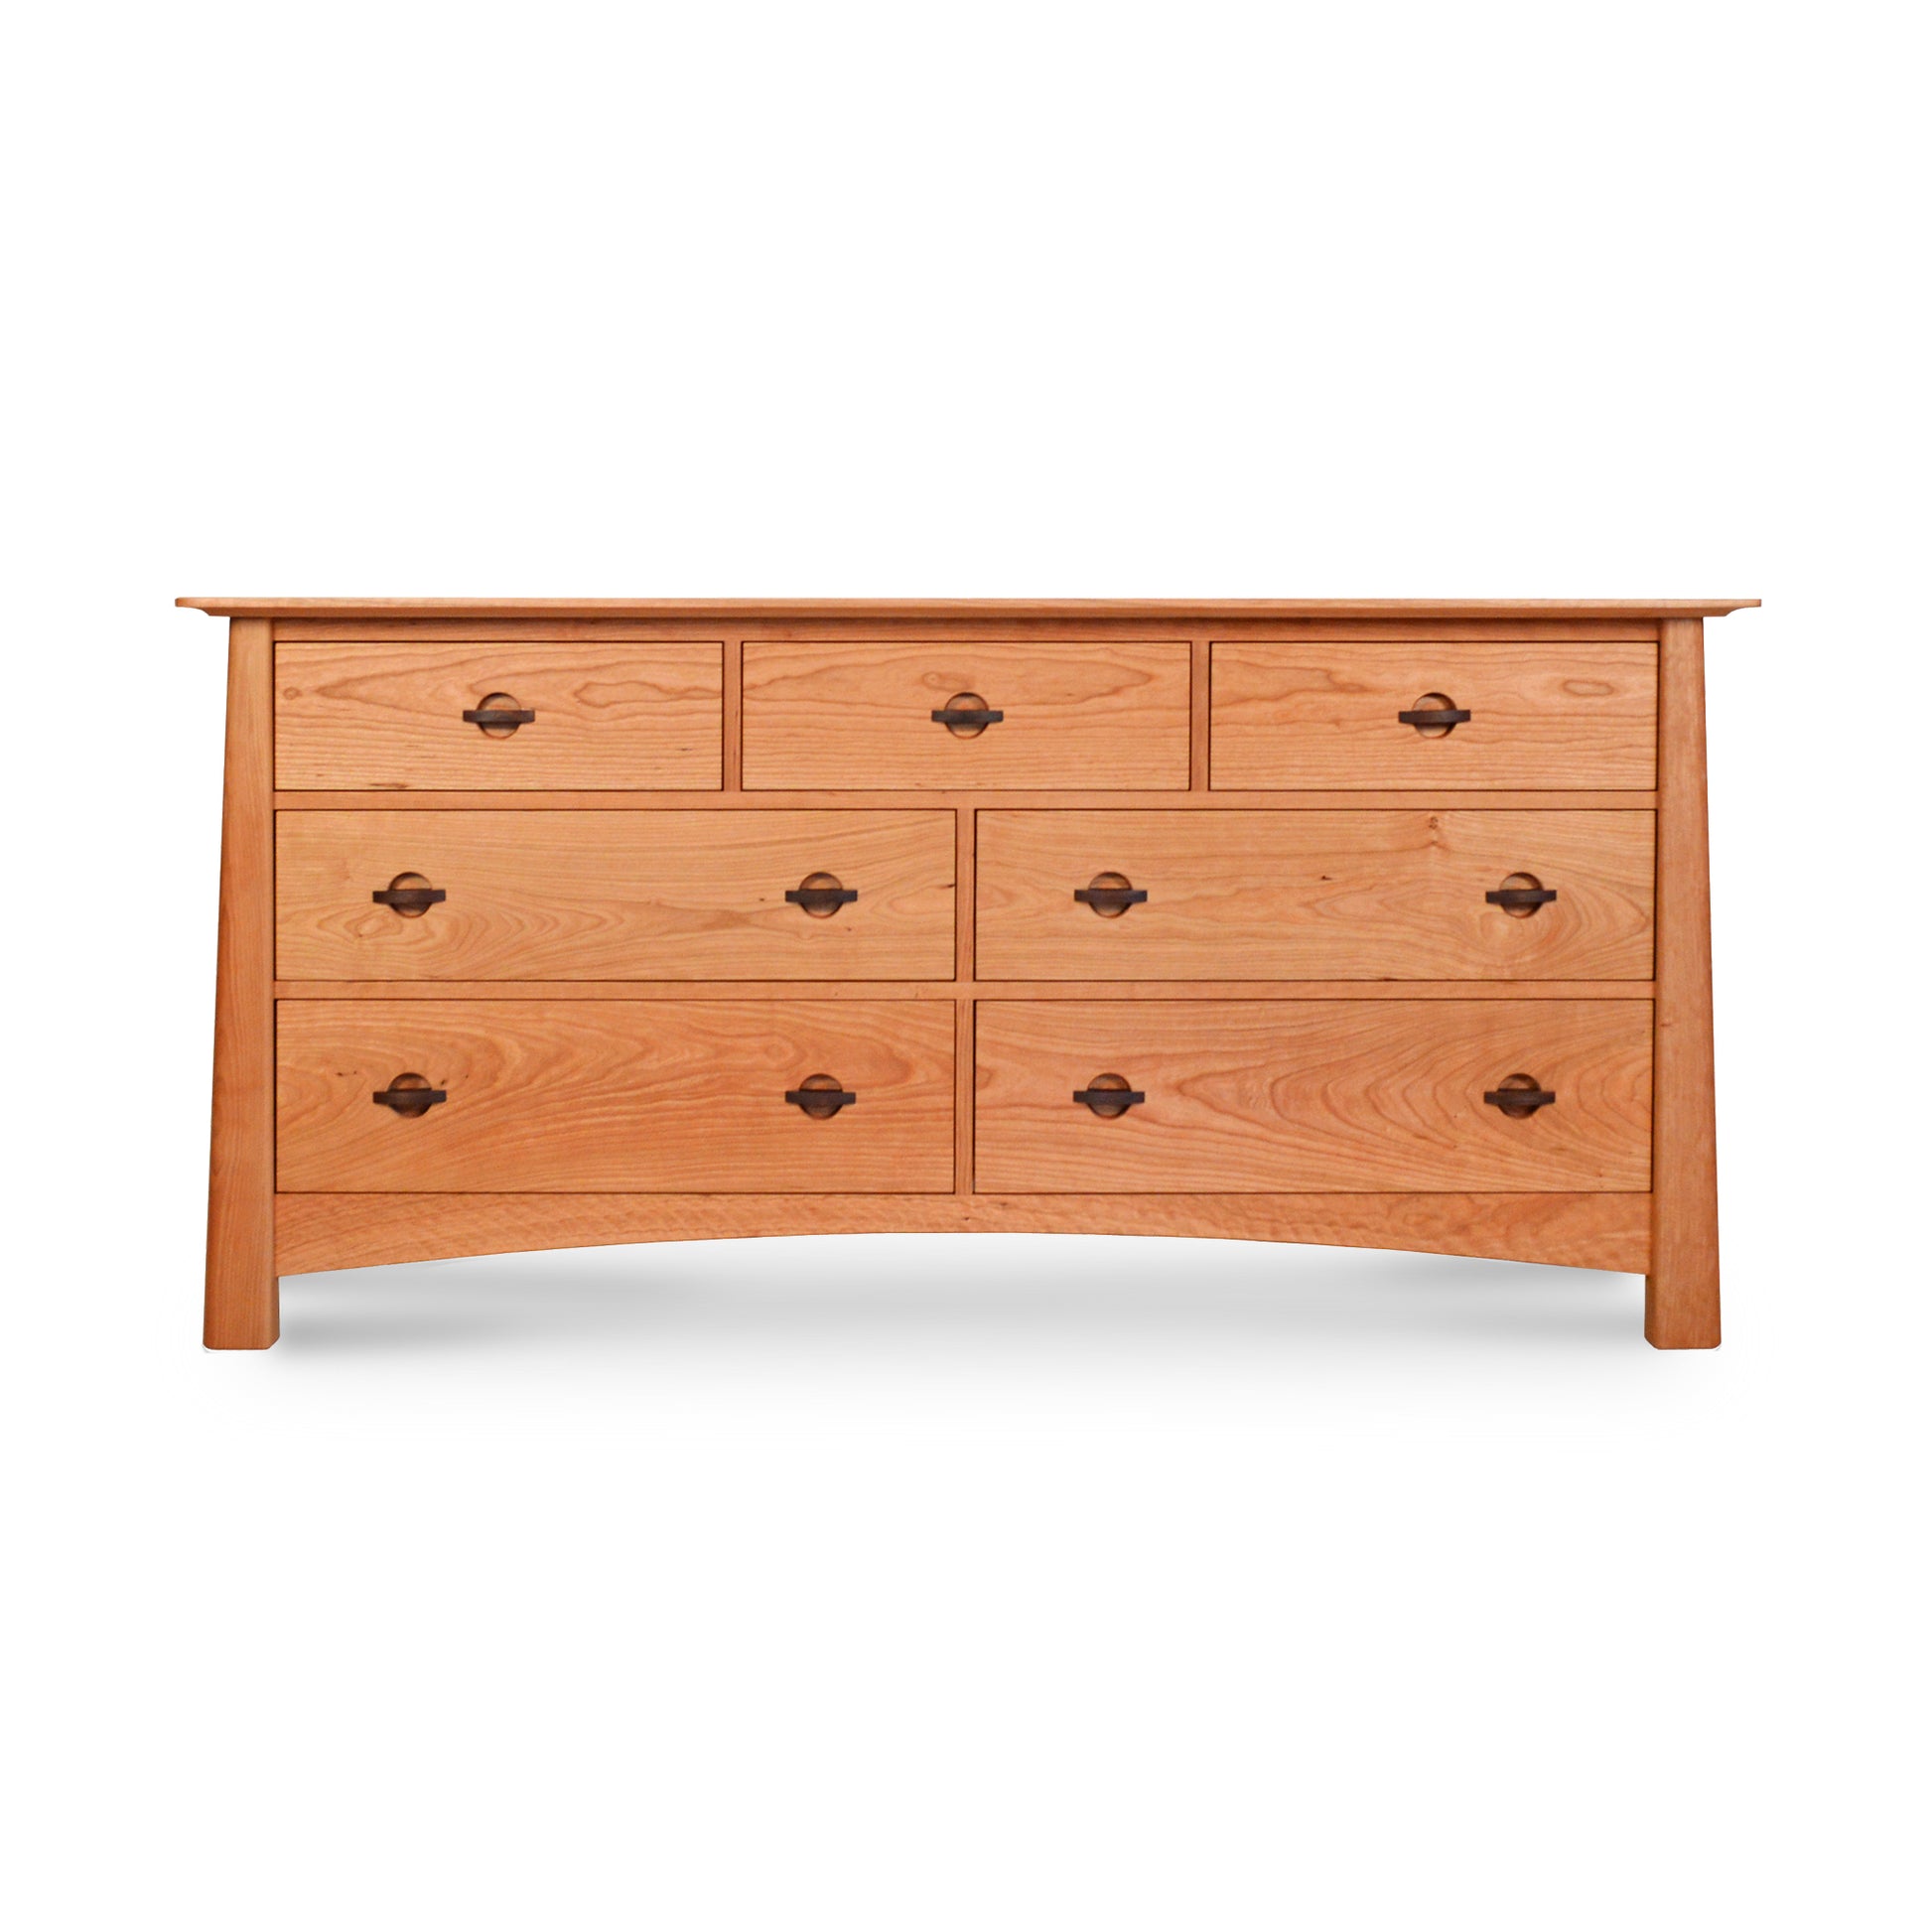 A Cherry Moon 7-Drawer Dresser from Maple Corner Woodworks, handmade from sustainably harvested wood, showcasing a natural finish and black metal handles, isolated on a white background.